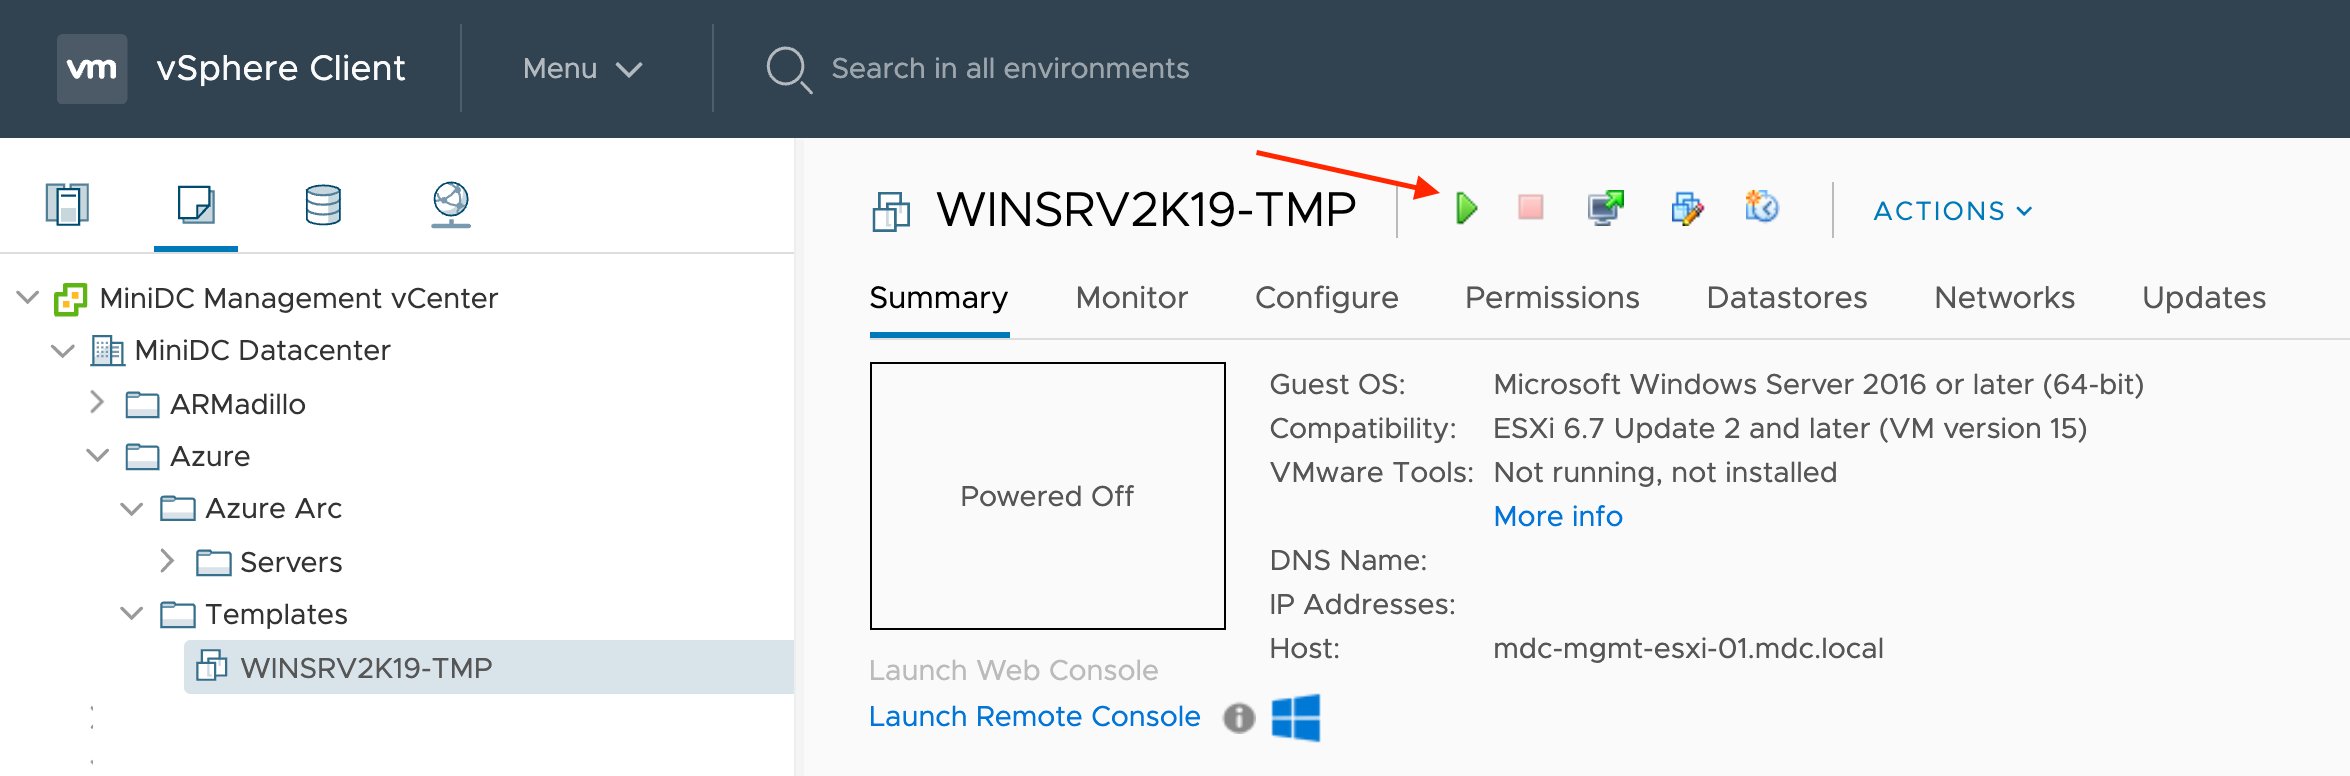 Screenshot of the Windows Server run button in the vSphere client.